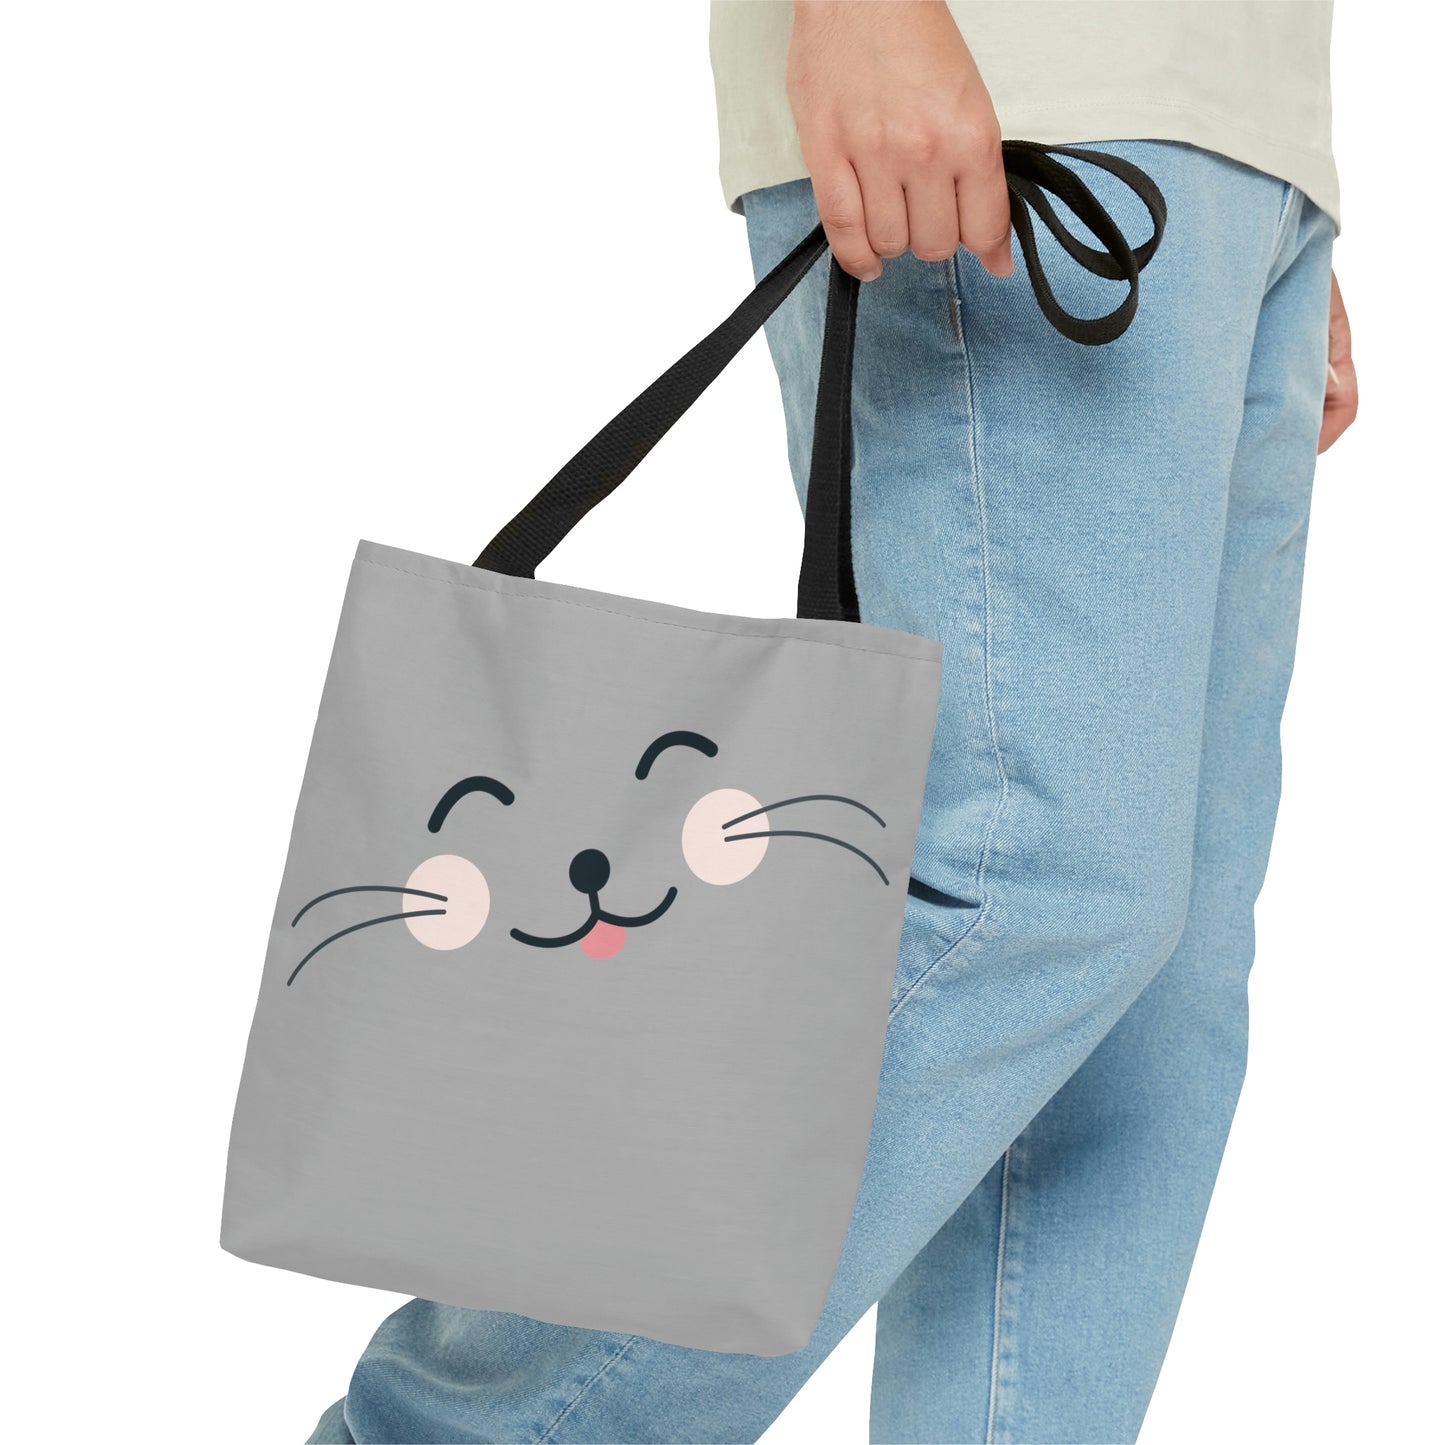 Mock up of a man carrying the small tote bag